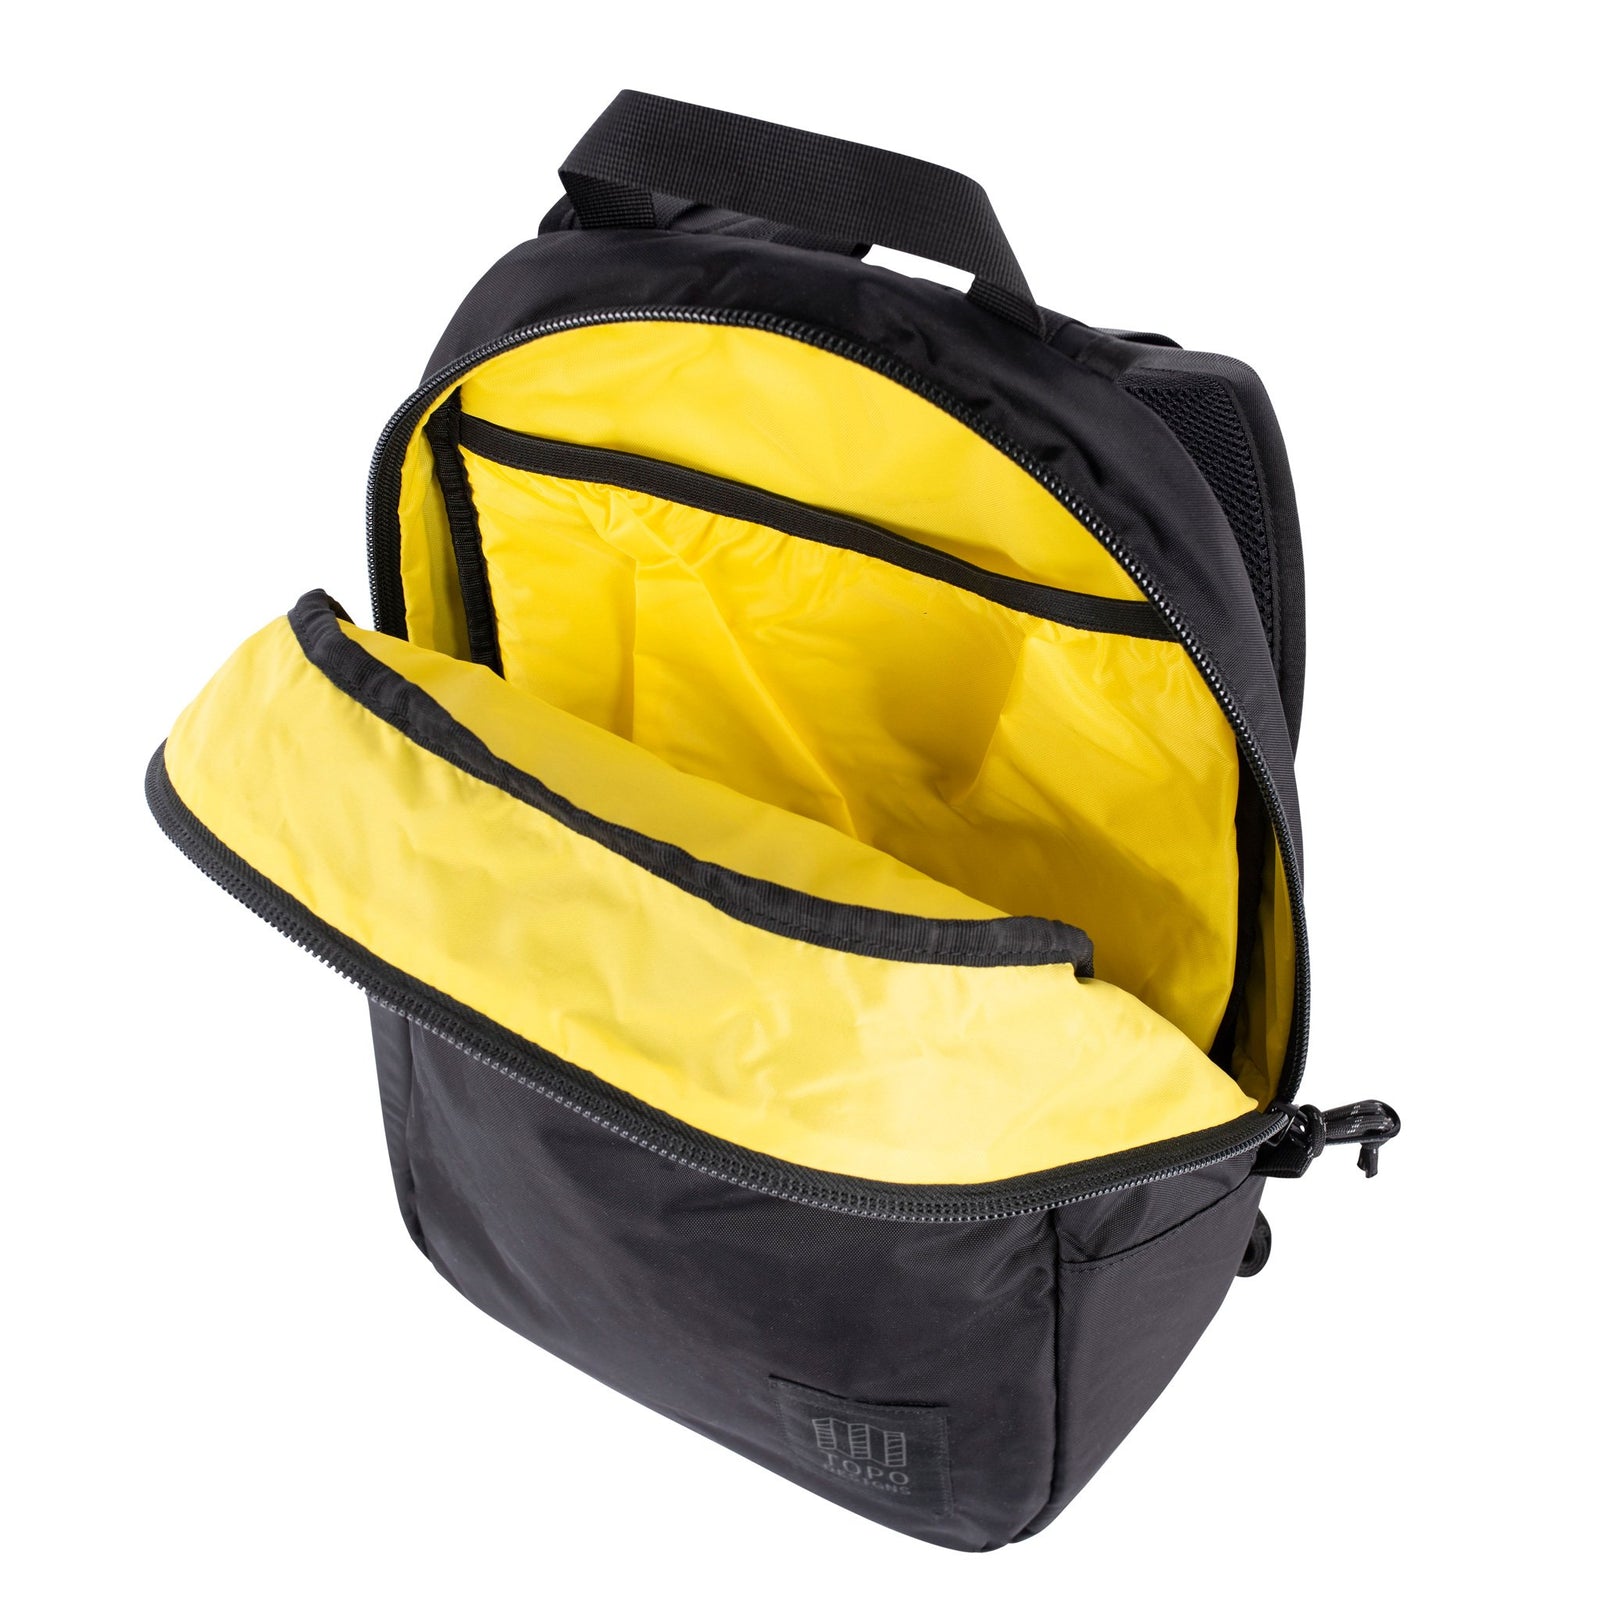 General detail product shot of Light Pack in Black/Black showing yellow lining and laptop sleeve.